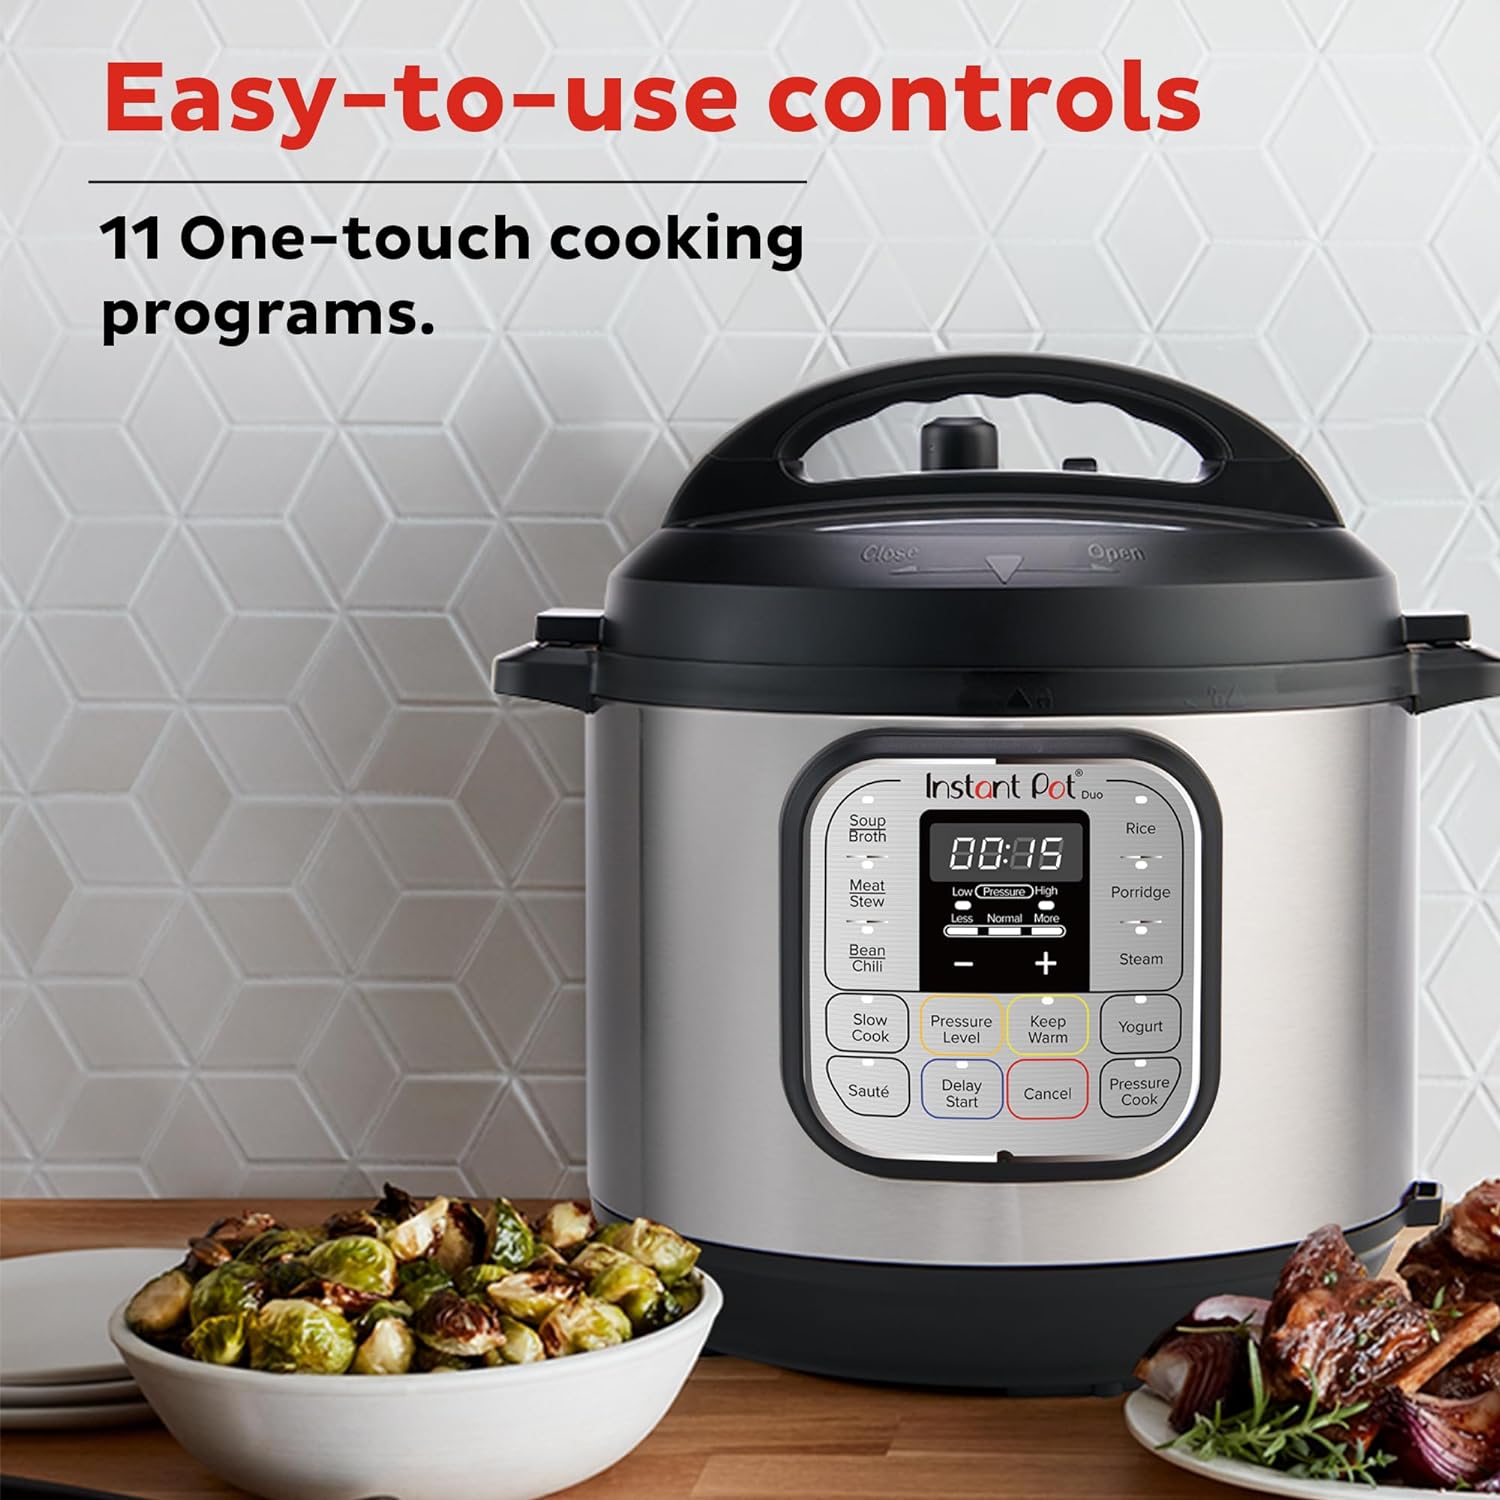 Instant Pot Duo 7-in-1 Electric Pressure Cooker, Slow Cooker, Rice Cooker, Steamer, Sauté, Yogurt Maker, Warmer & Sterilizer, Includes Free App with over 1900 Recipes, Stainless Steel, 3 Quart - image 6 of 9